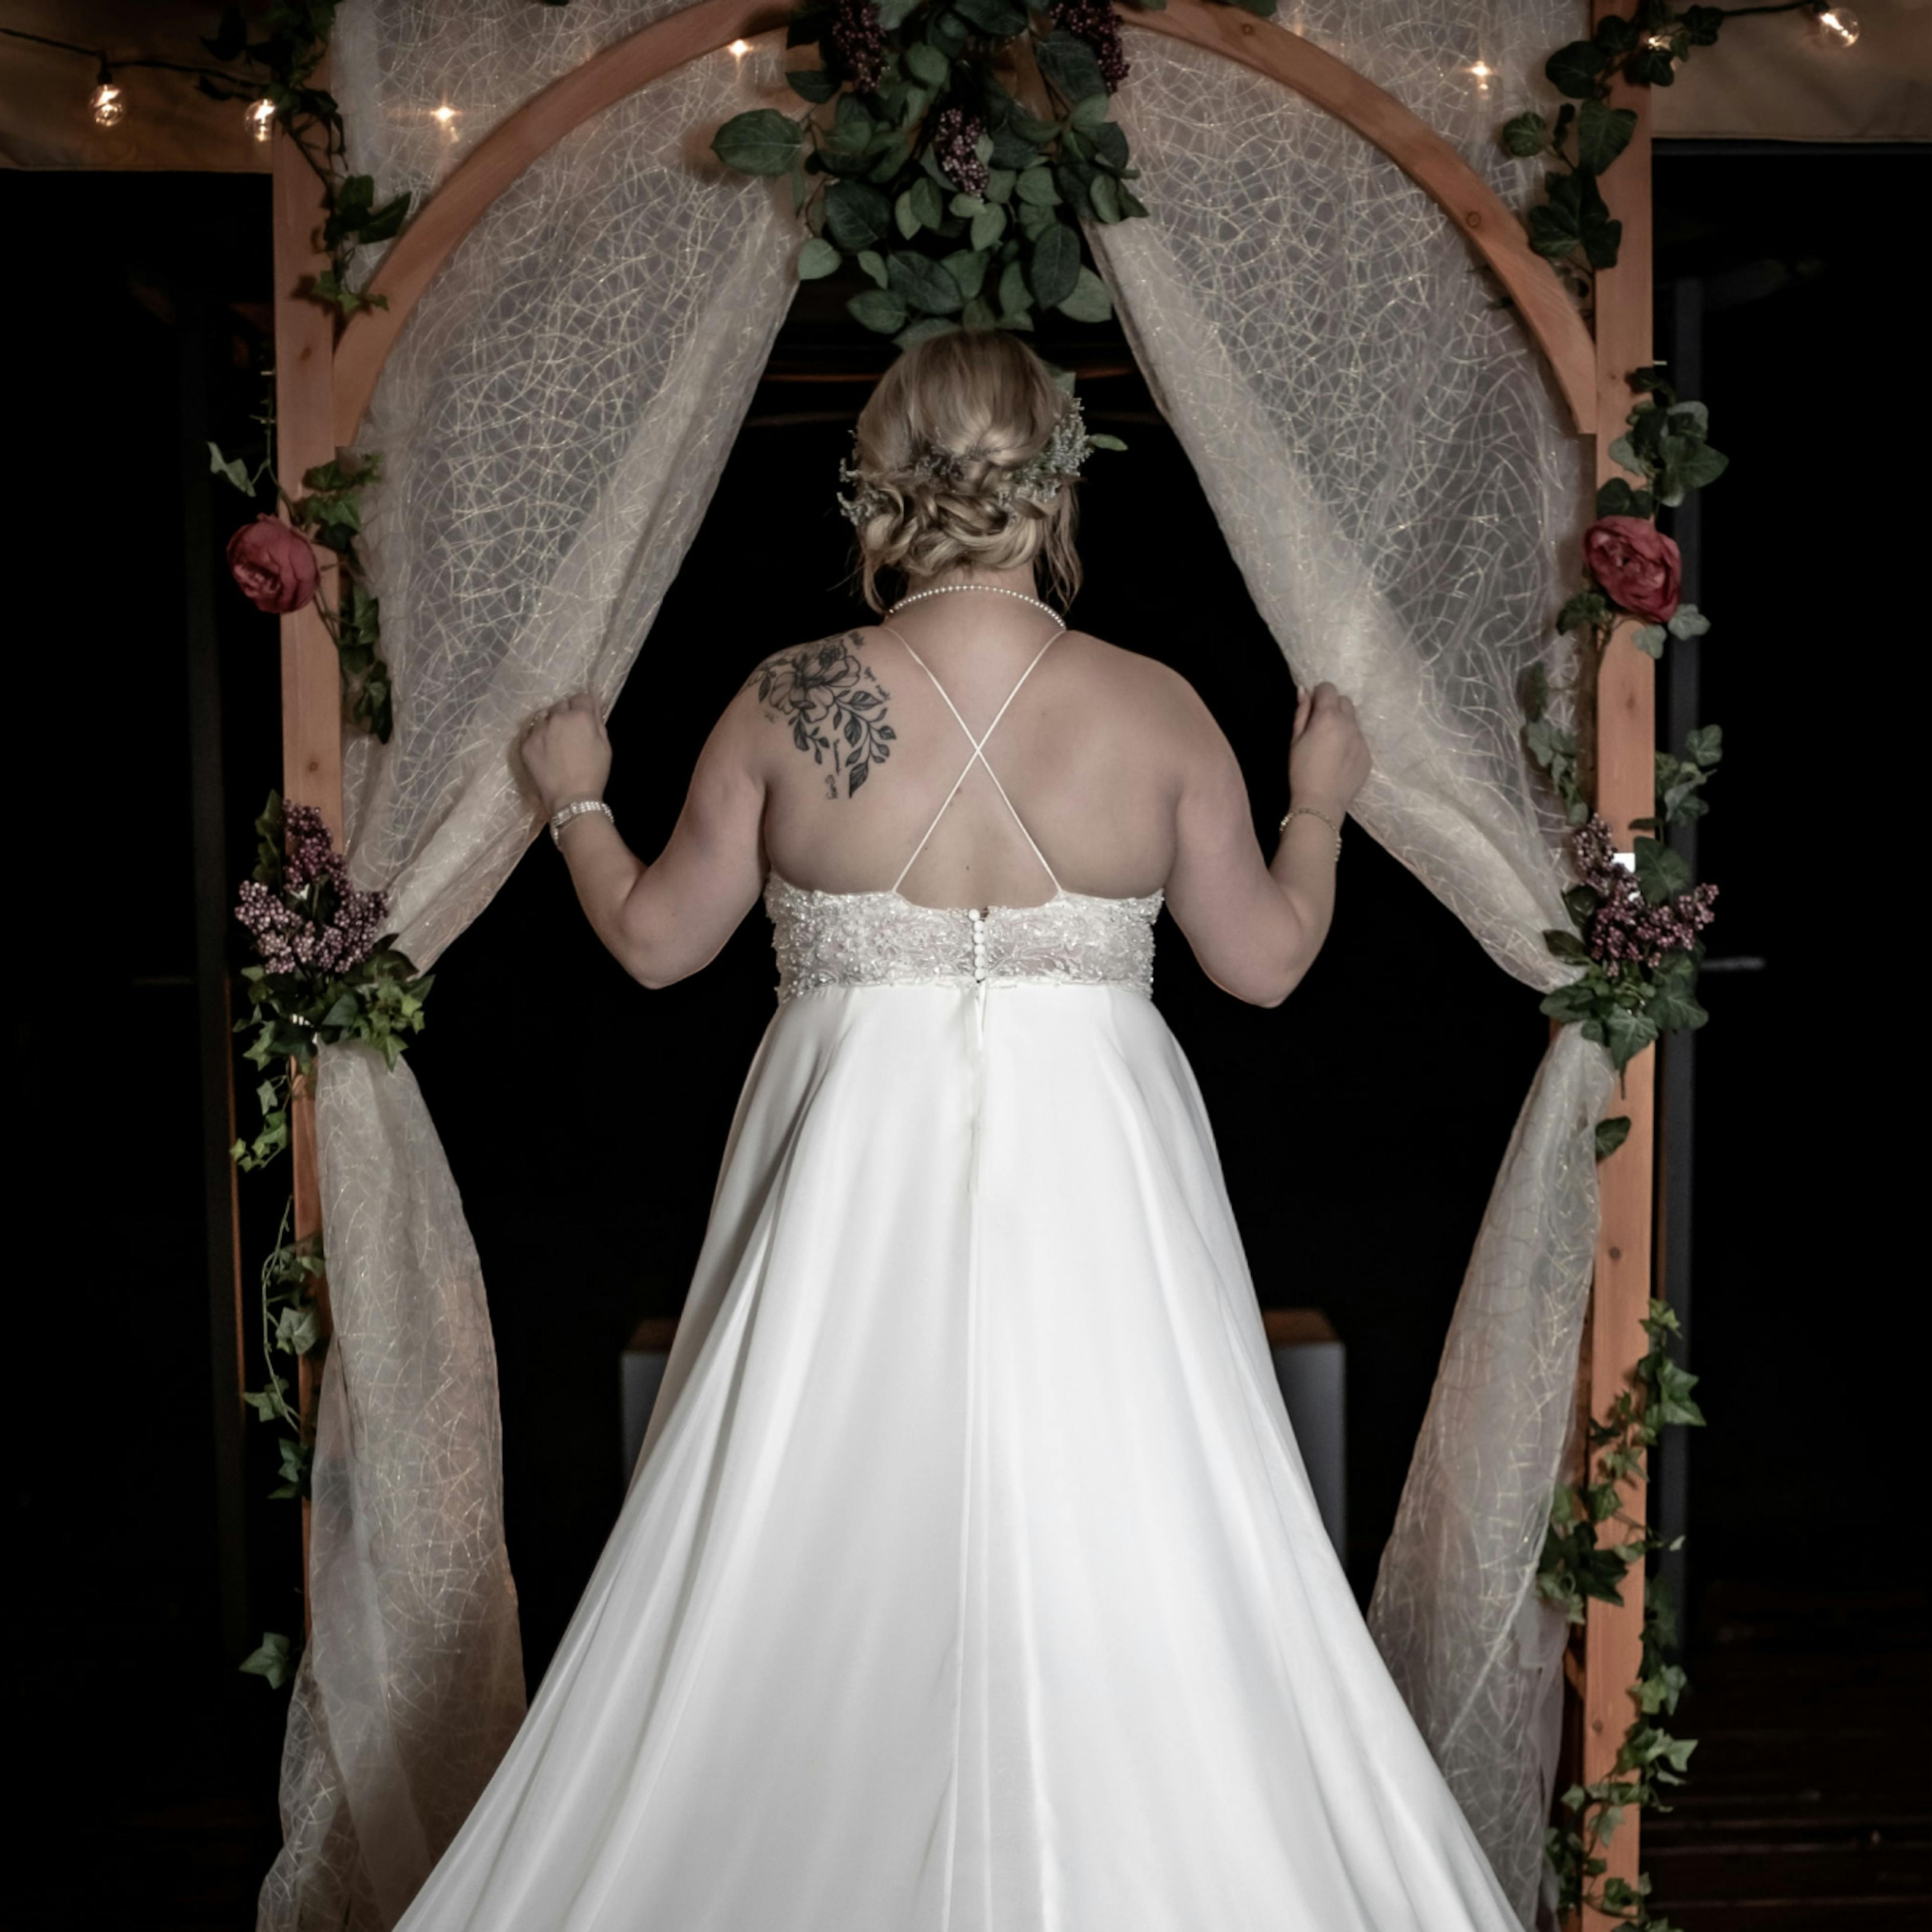 A bride realizes that the day is about her, and that she is perfect, back rolls and all.